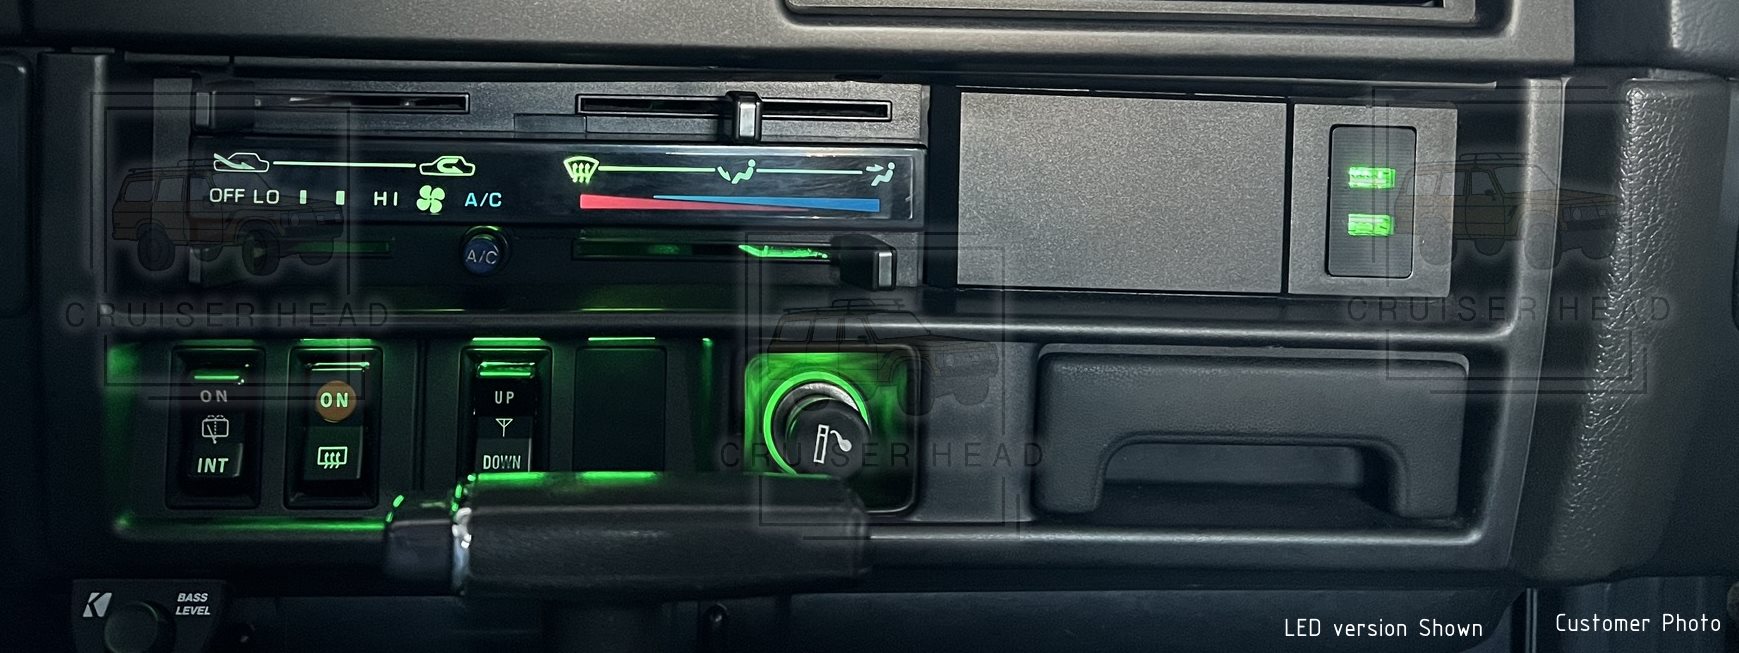 FJ62 Bezel with LED USB charger installed into dash